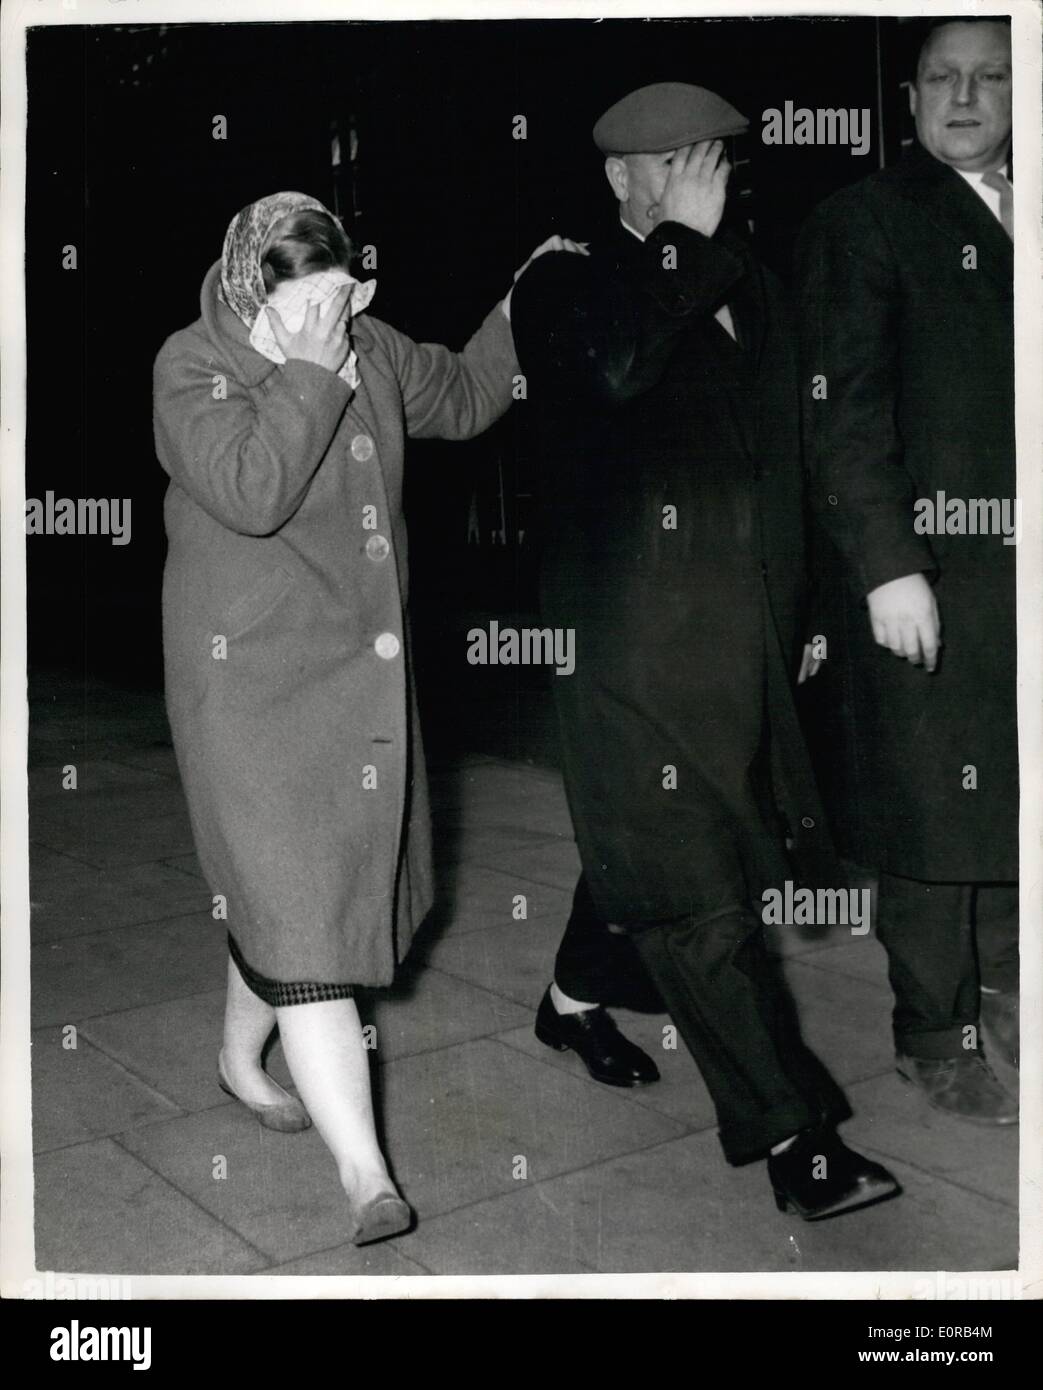 Dec. 12, 1958 - Barbara Baker - the Dog-Case Girl Plays 0 Penalty: Barbara Baker the 24 year old kennel girl who was the missing witness in the dog doping trial at the Old Bailey - went to Cannon Row Police station yesterday. She left after six hours - after paying 0 - the amount in which she was bound over at a magistrate's court to appear at the trial., Photo Shows Barbara Baker - and her father hide their faces - after visiting Nannon Row Police station. Stock Photo